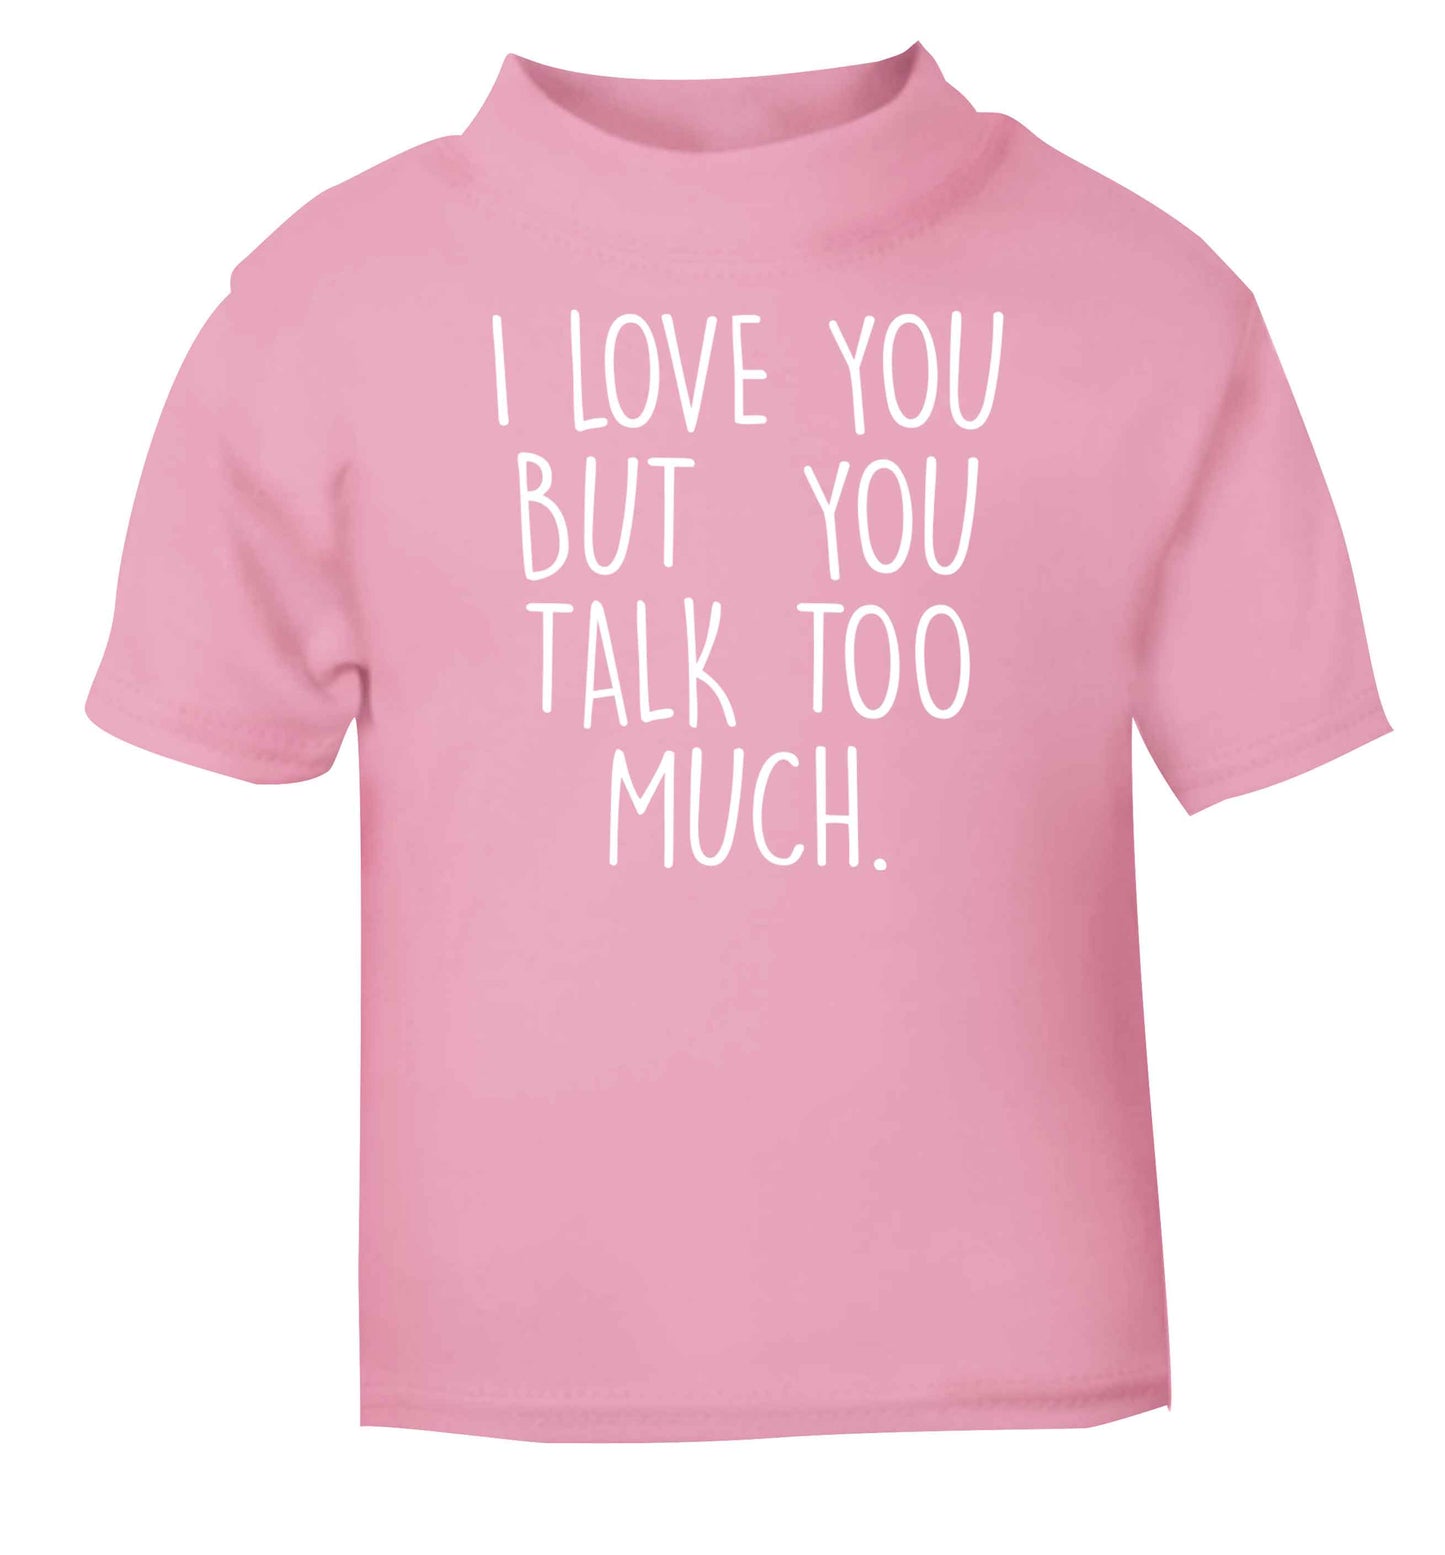 I love you but you talk too much light pink baby toddler Tshirt 2 Years